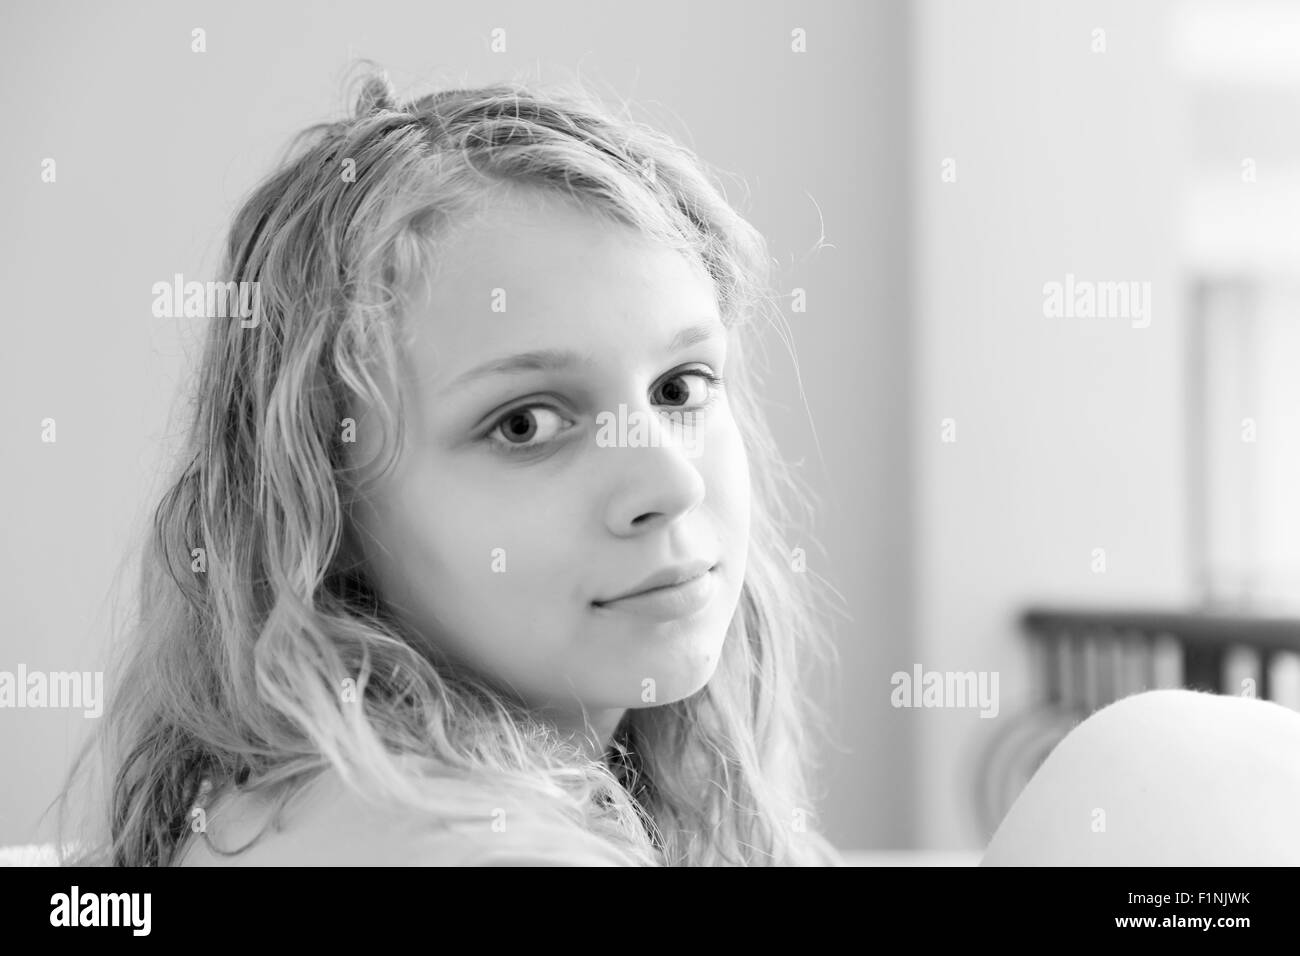 Blond teenage girl closeup monochrome indoor portrait with natural light Stock Photo